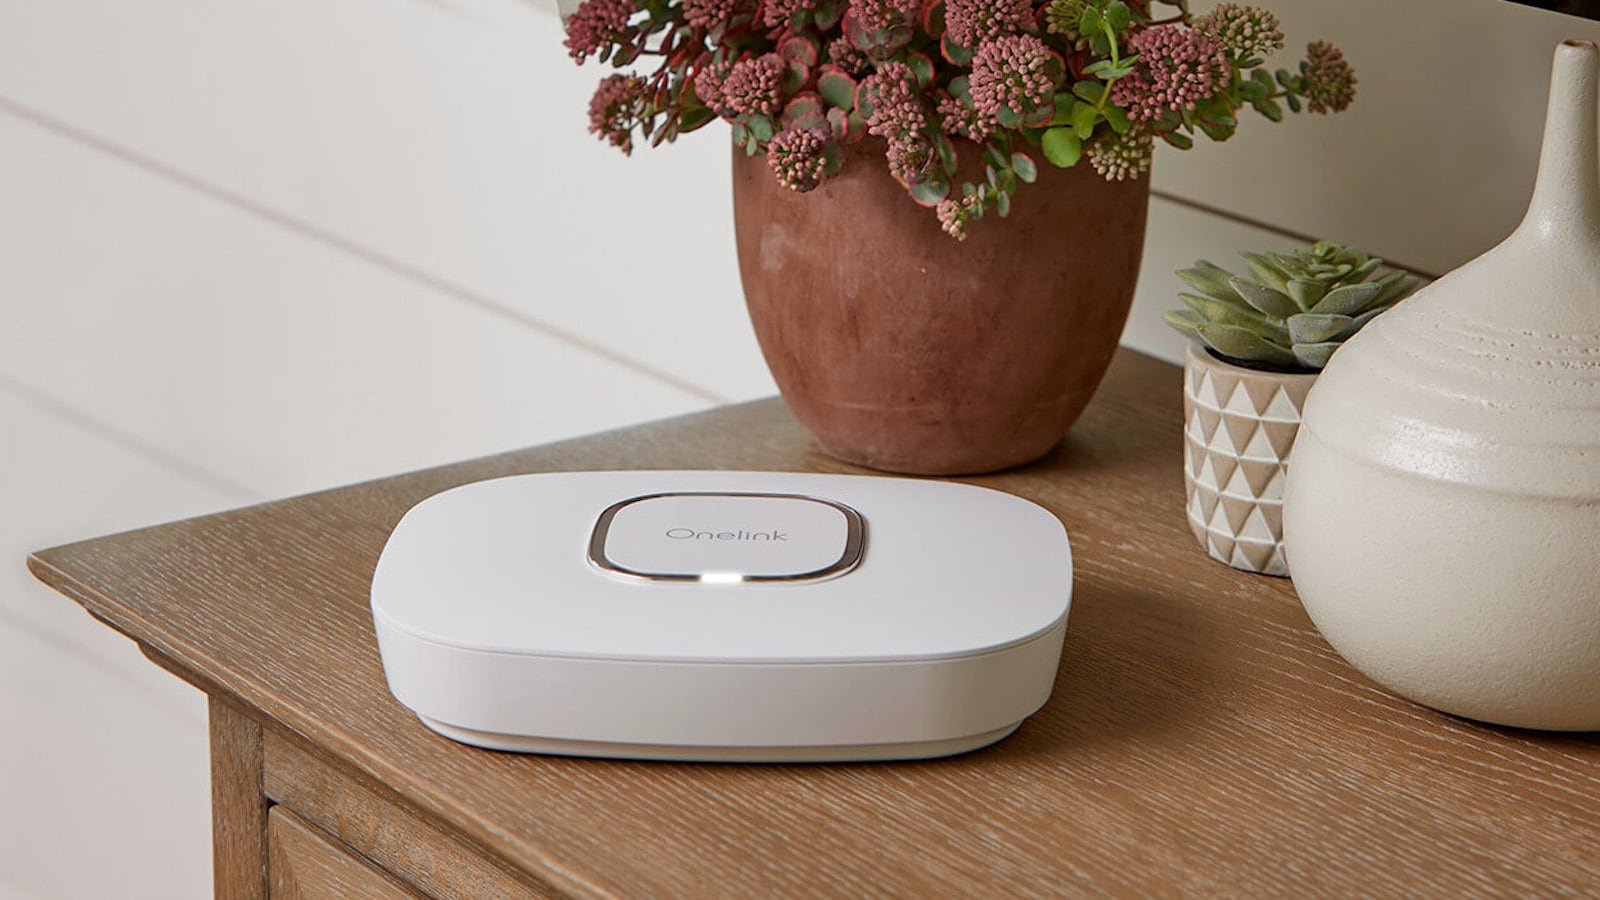 First Alert Onelink smoke and CO detector provides two sensors in one device